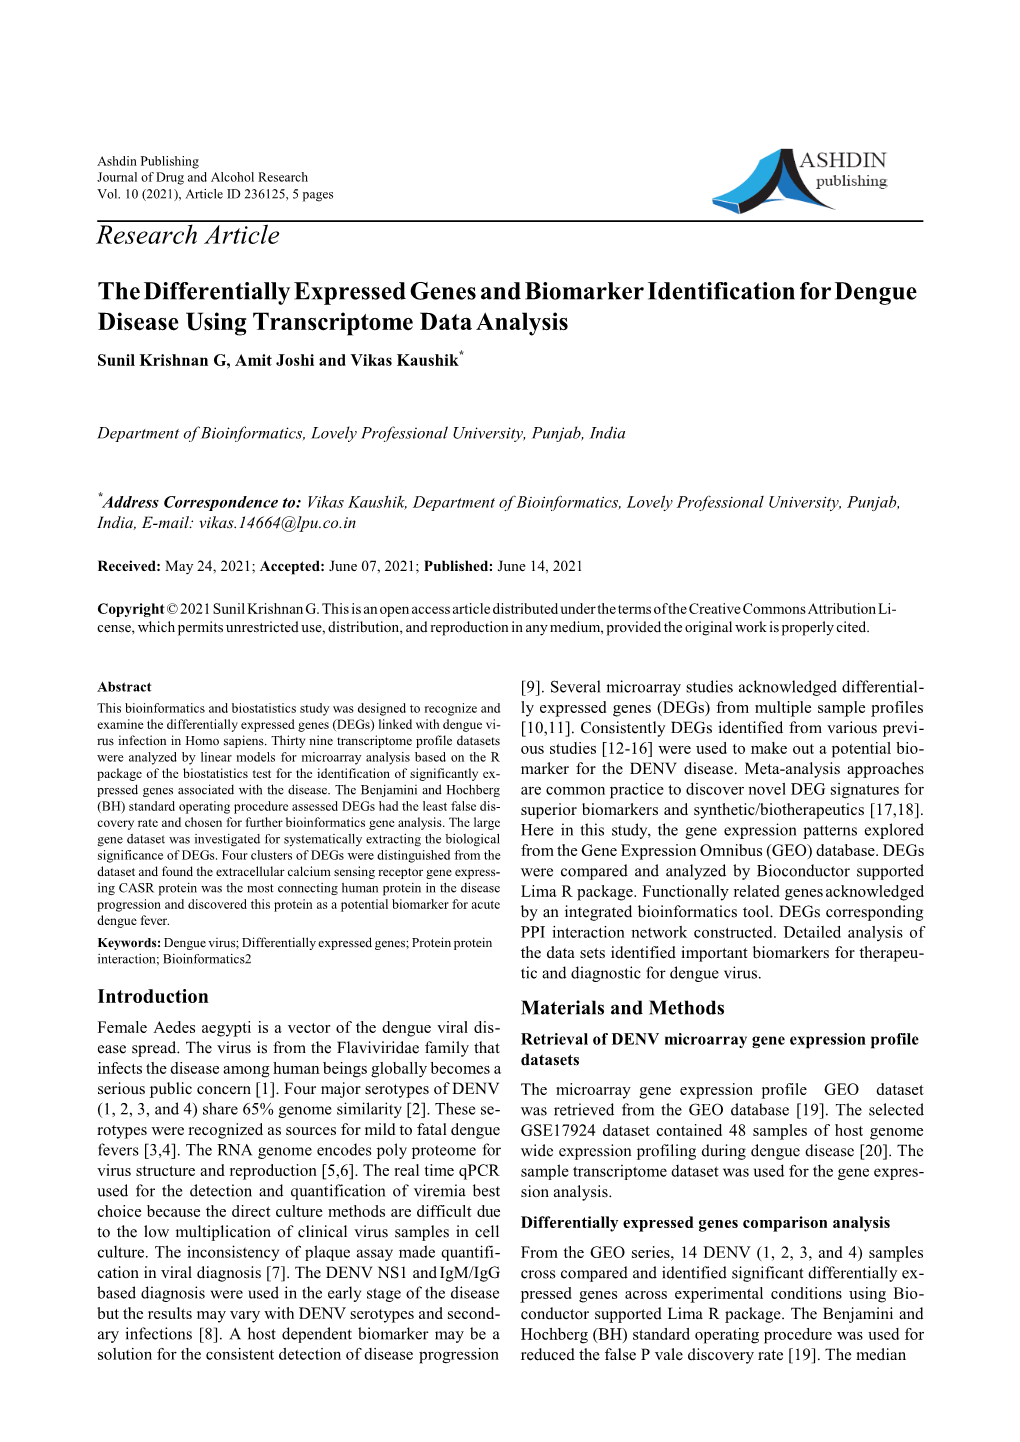 Research Article the Differentially Expressed